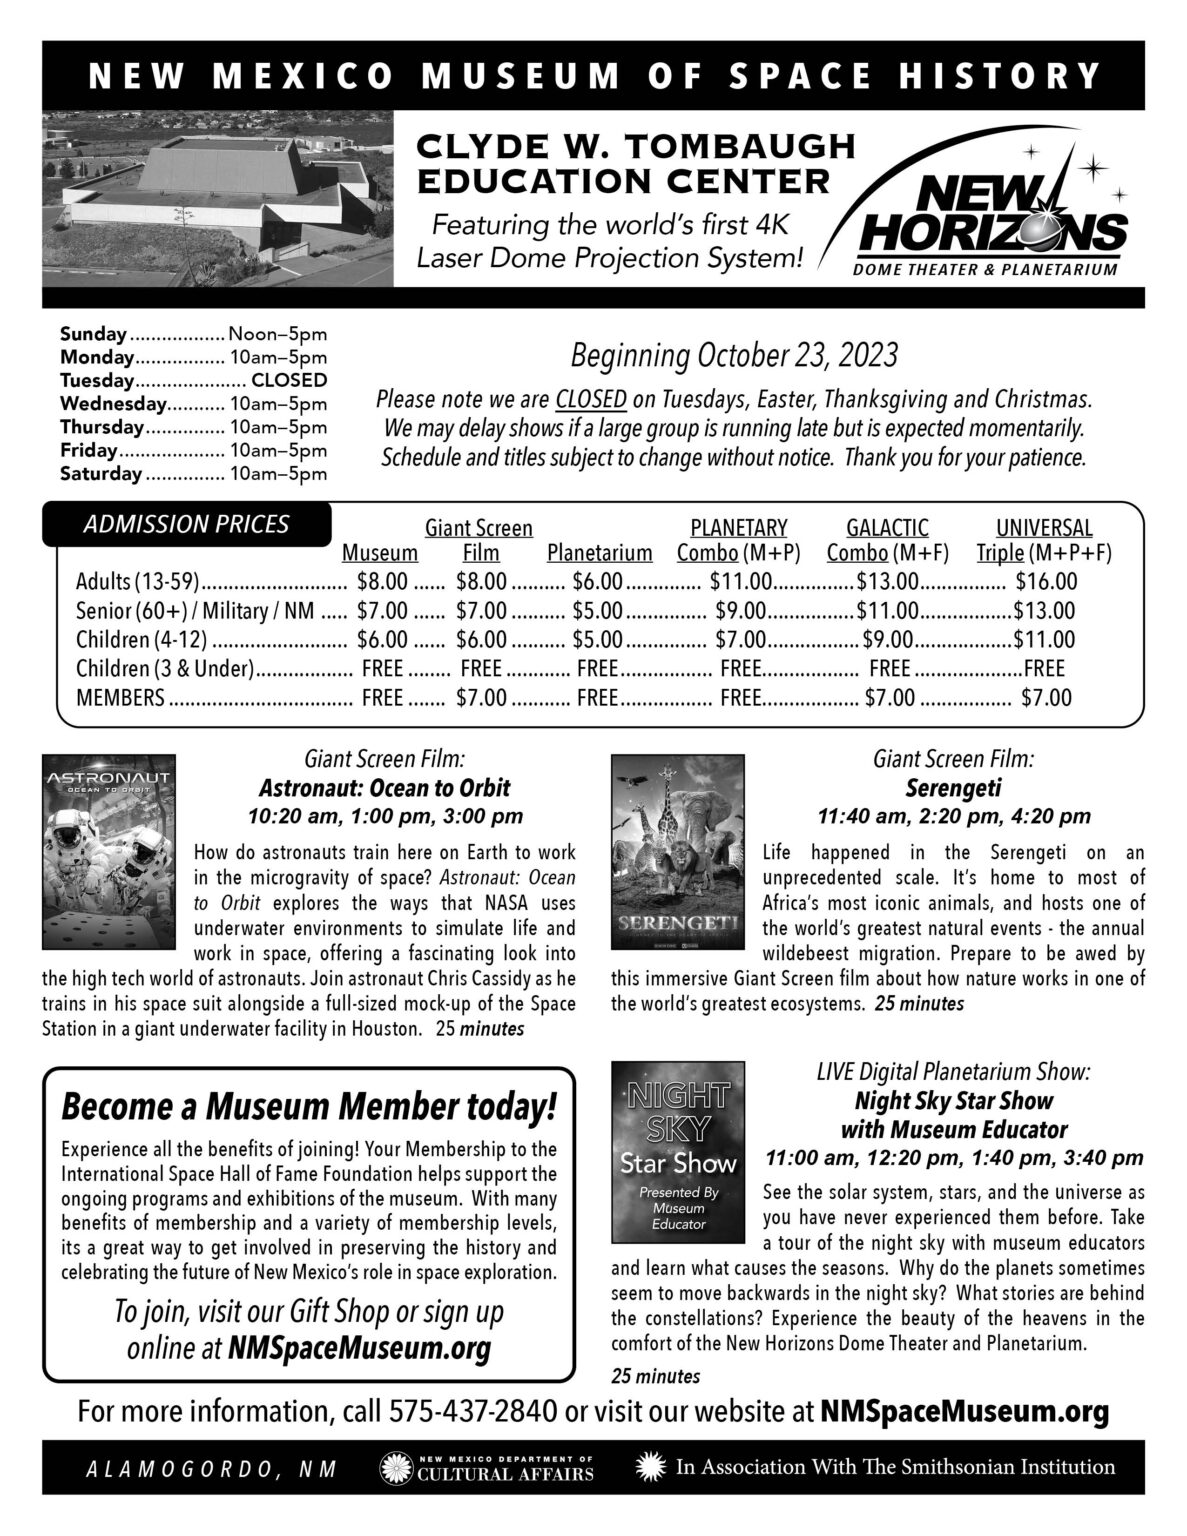 NM Museum of Space History New Horizons Dome Theater Information